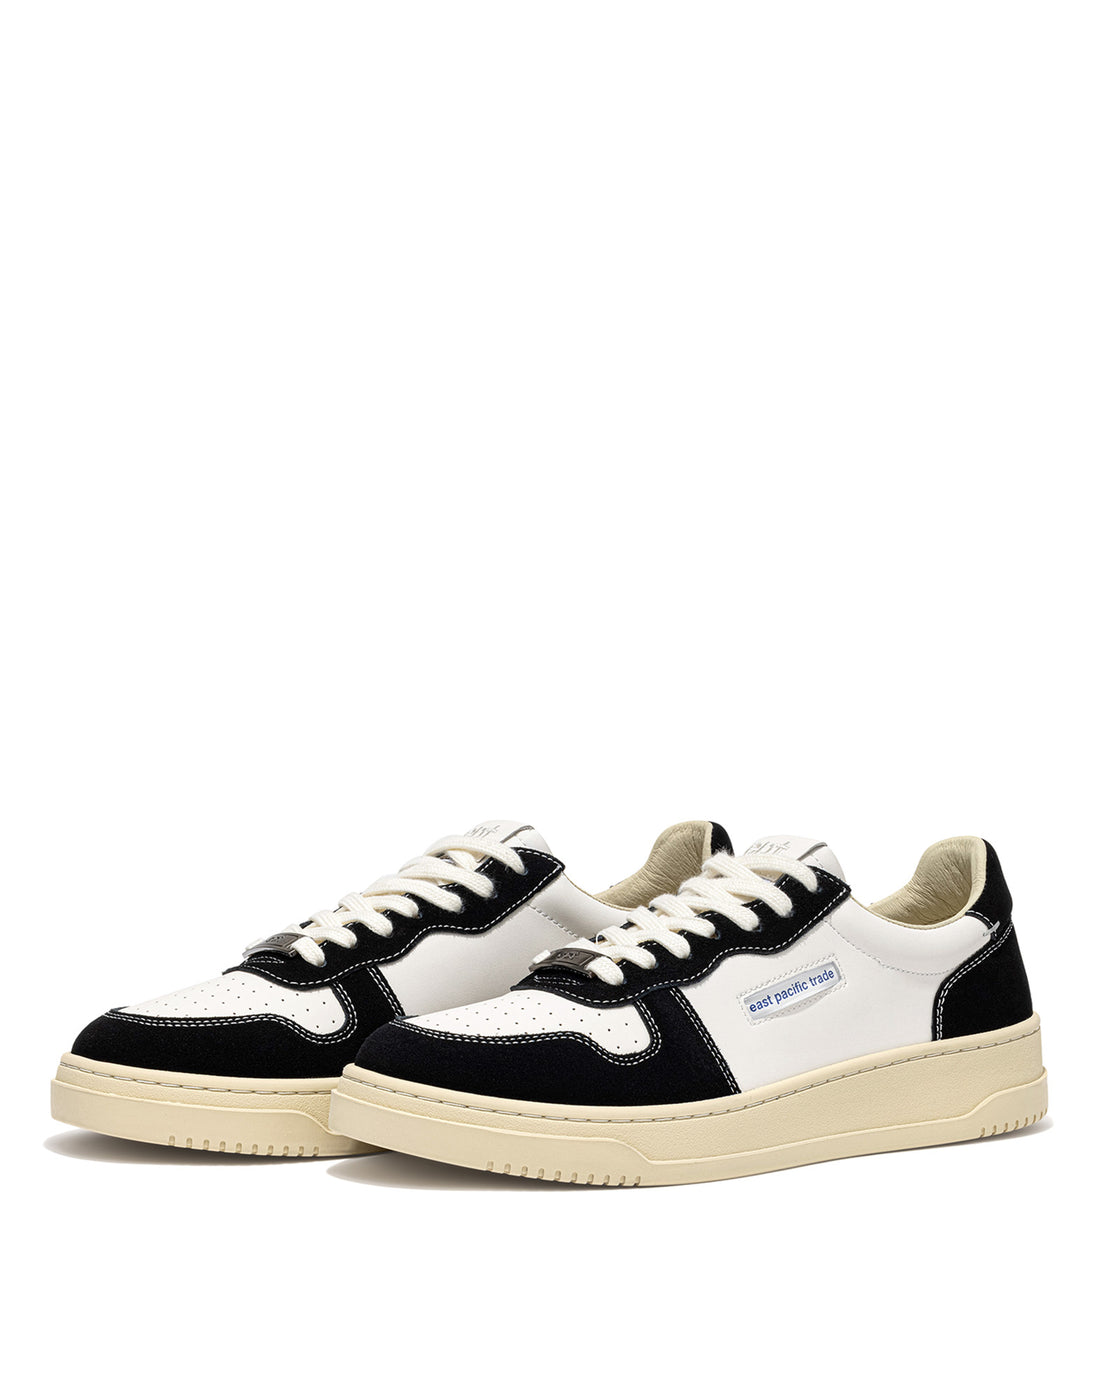 EPT Sneakers Court Suede Black/Off White